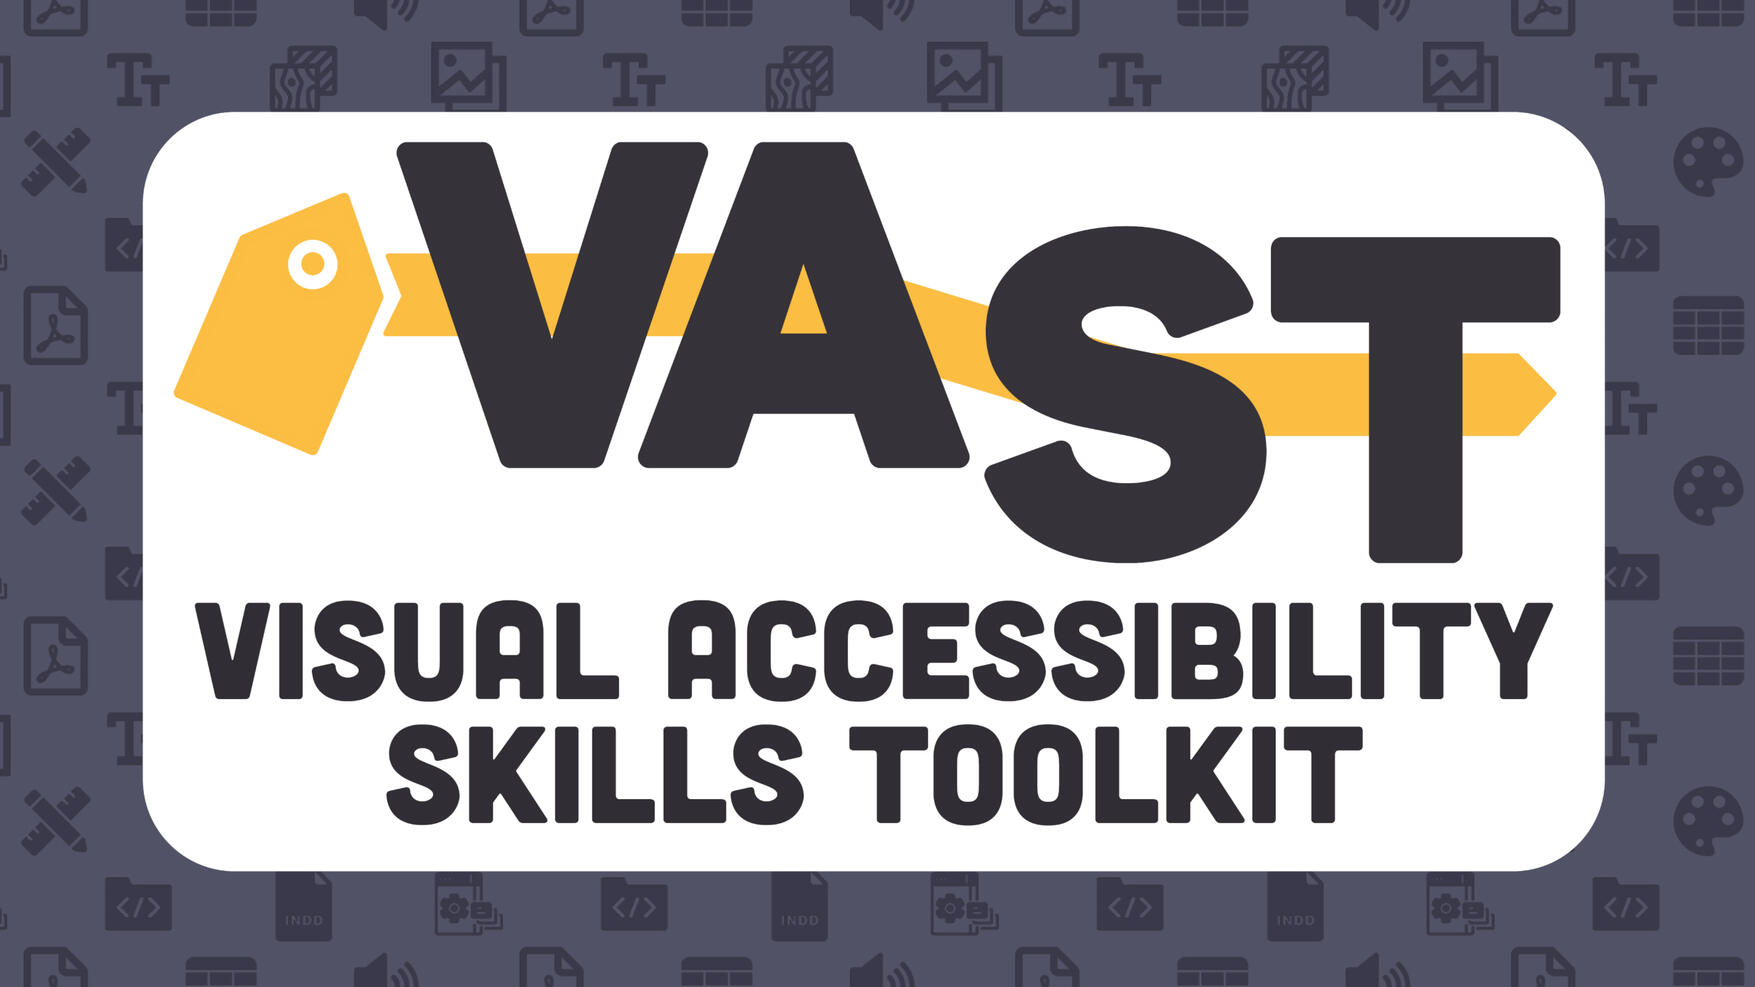 Logo for VAST. A stroke of colour connects a tag pictogram to the letters V, A, S, and T. Below the acronym is the text "Visual Accessibility Skills Toolkit"